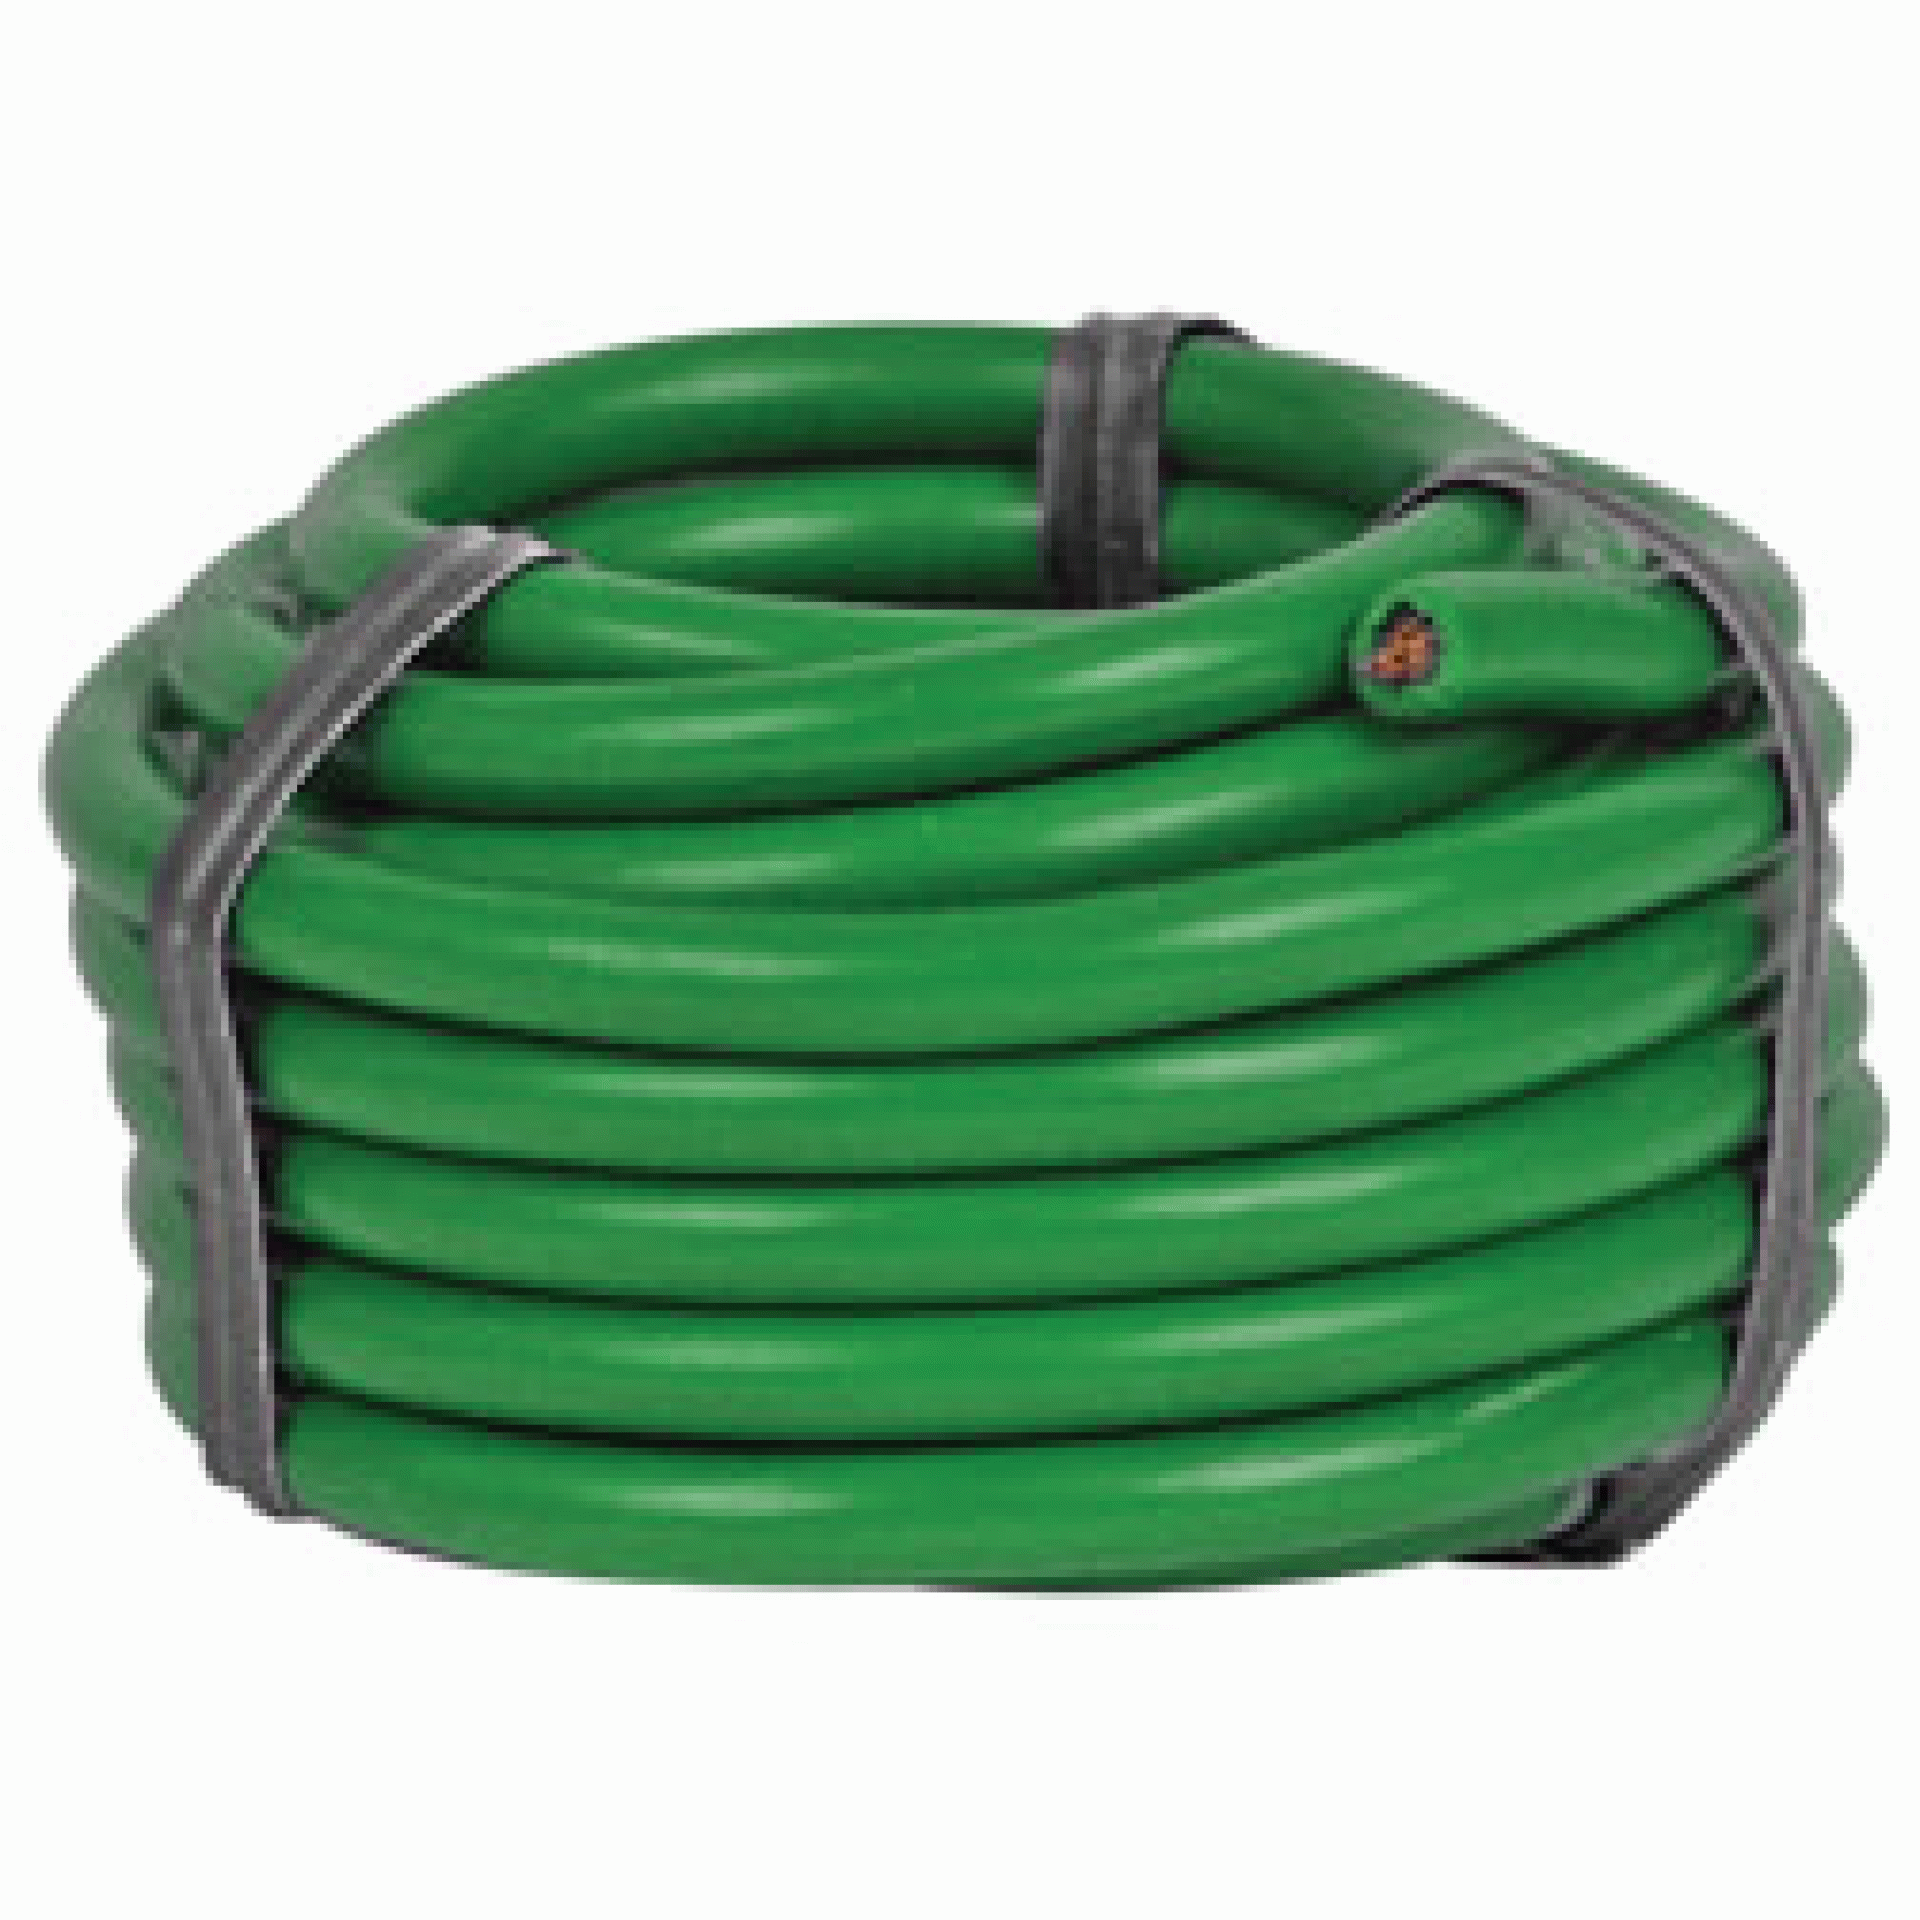 CAMCO MFG INC | 64202 | WIRE PRIMARY 16 GAUGE 30' - GREEN